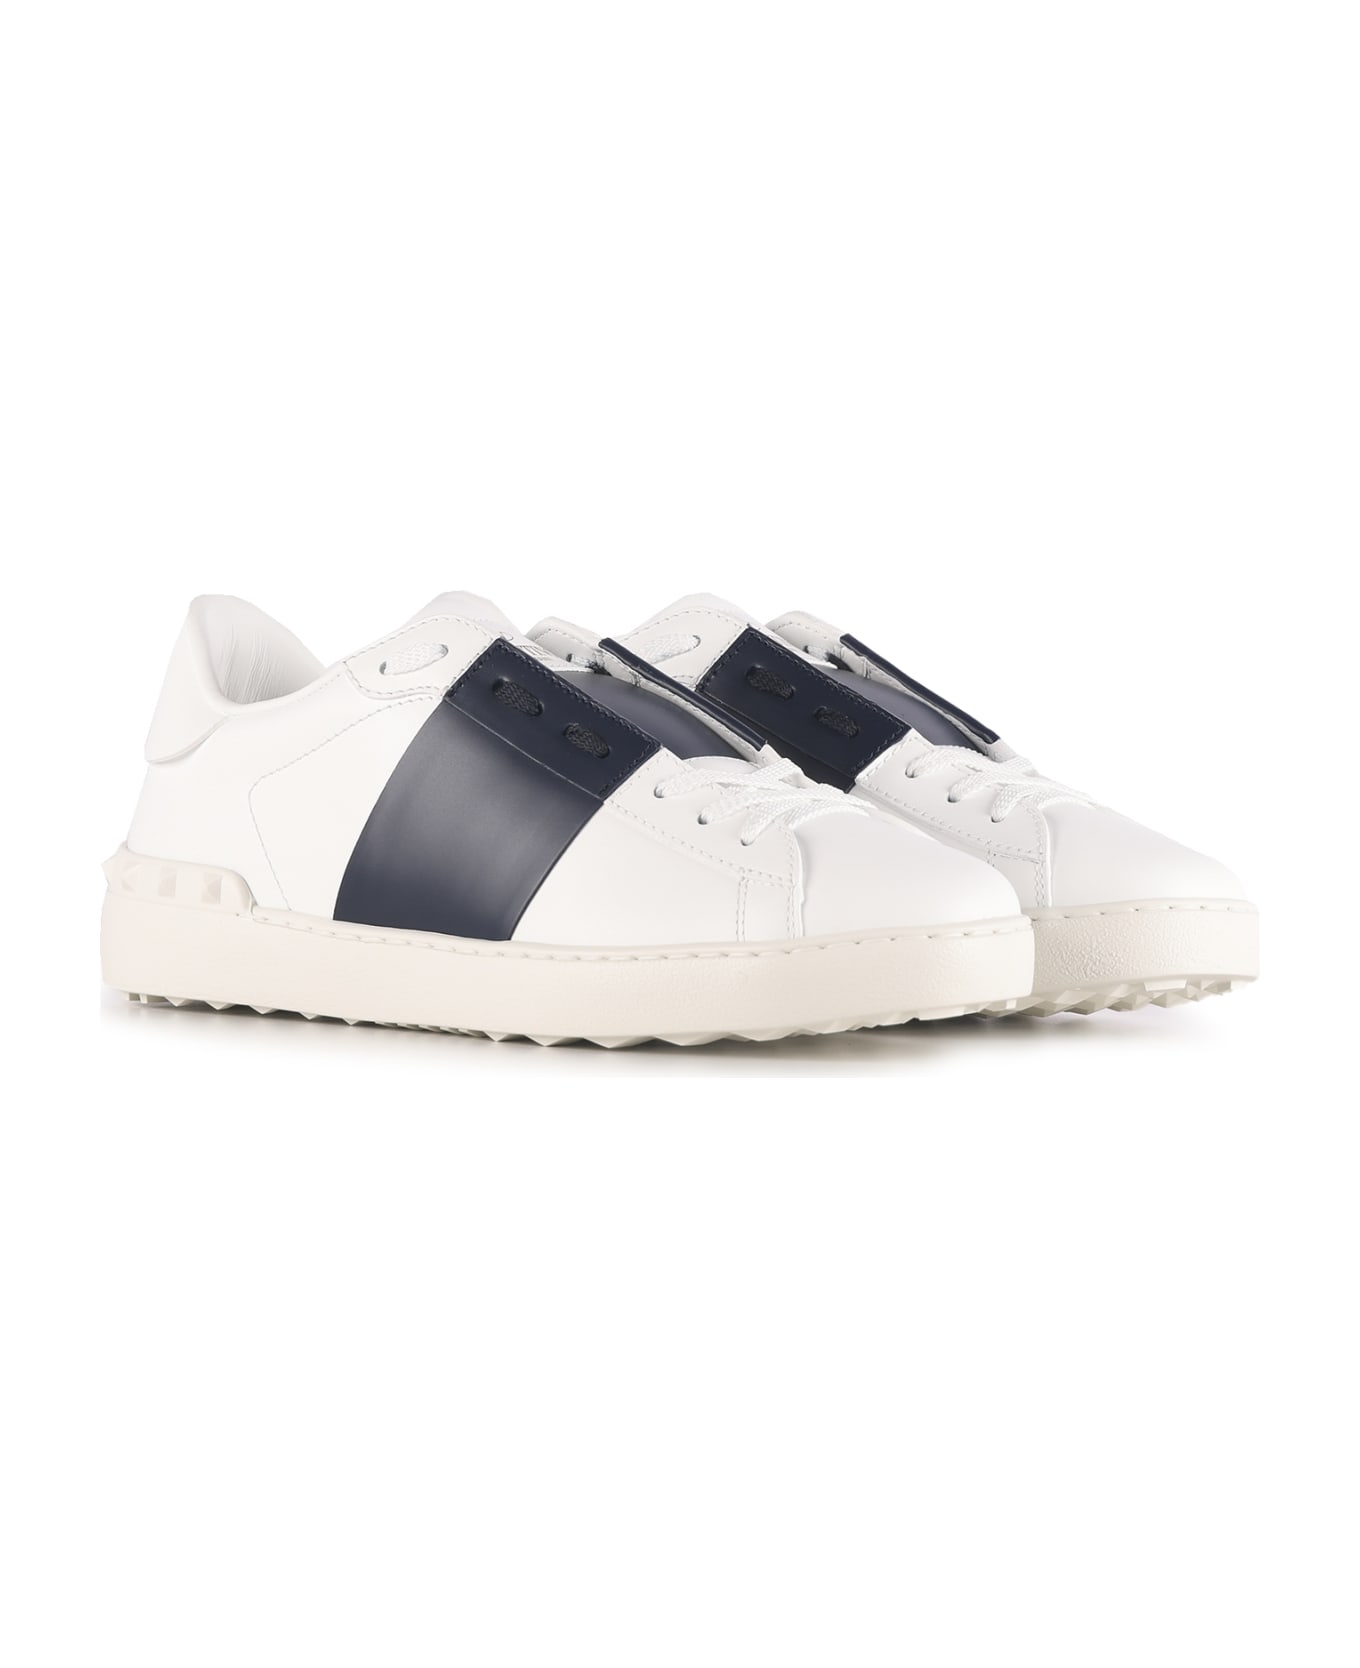 Valentino Garavani Open Sneakers In Leather With Contrasting Band - white/marine スニーカー